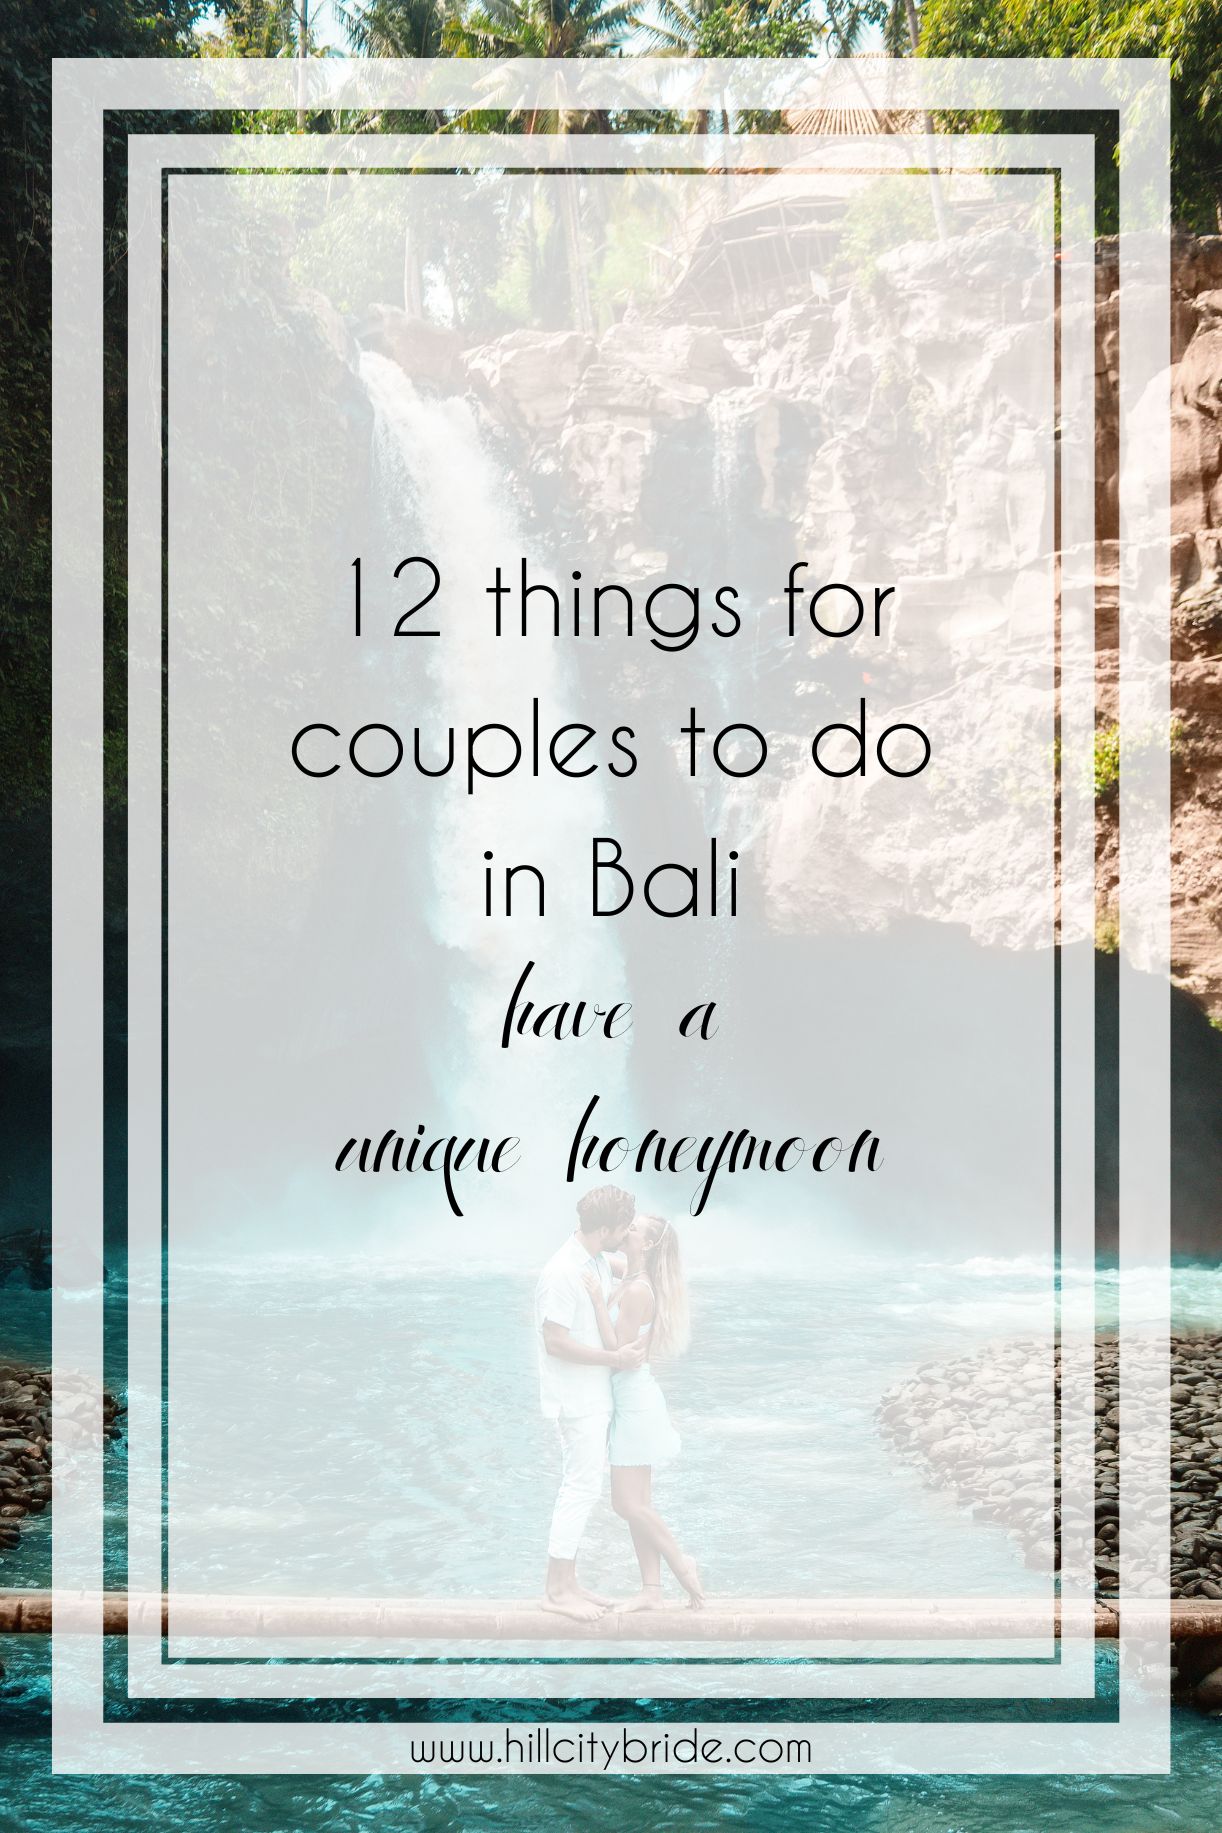 12 Amazing Things to Do in Bali for Couples